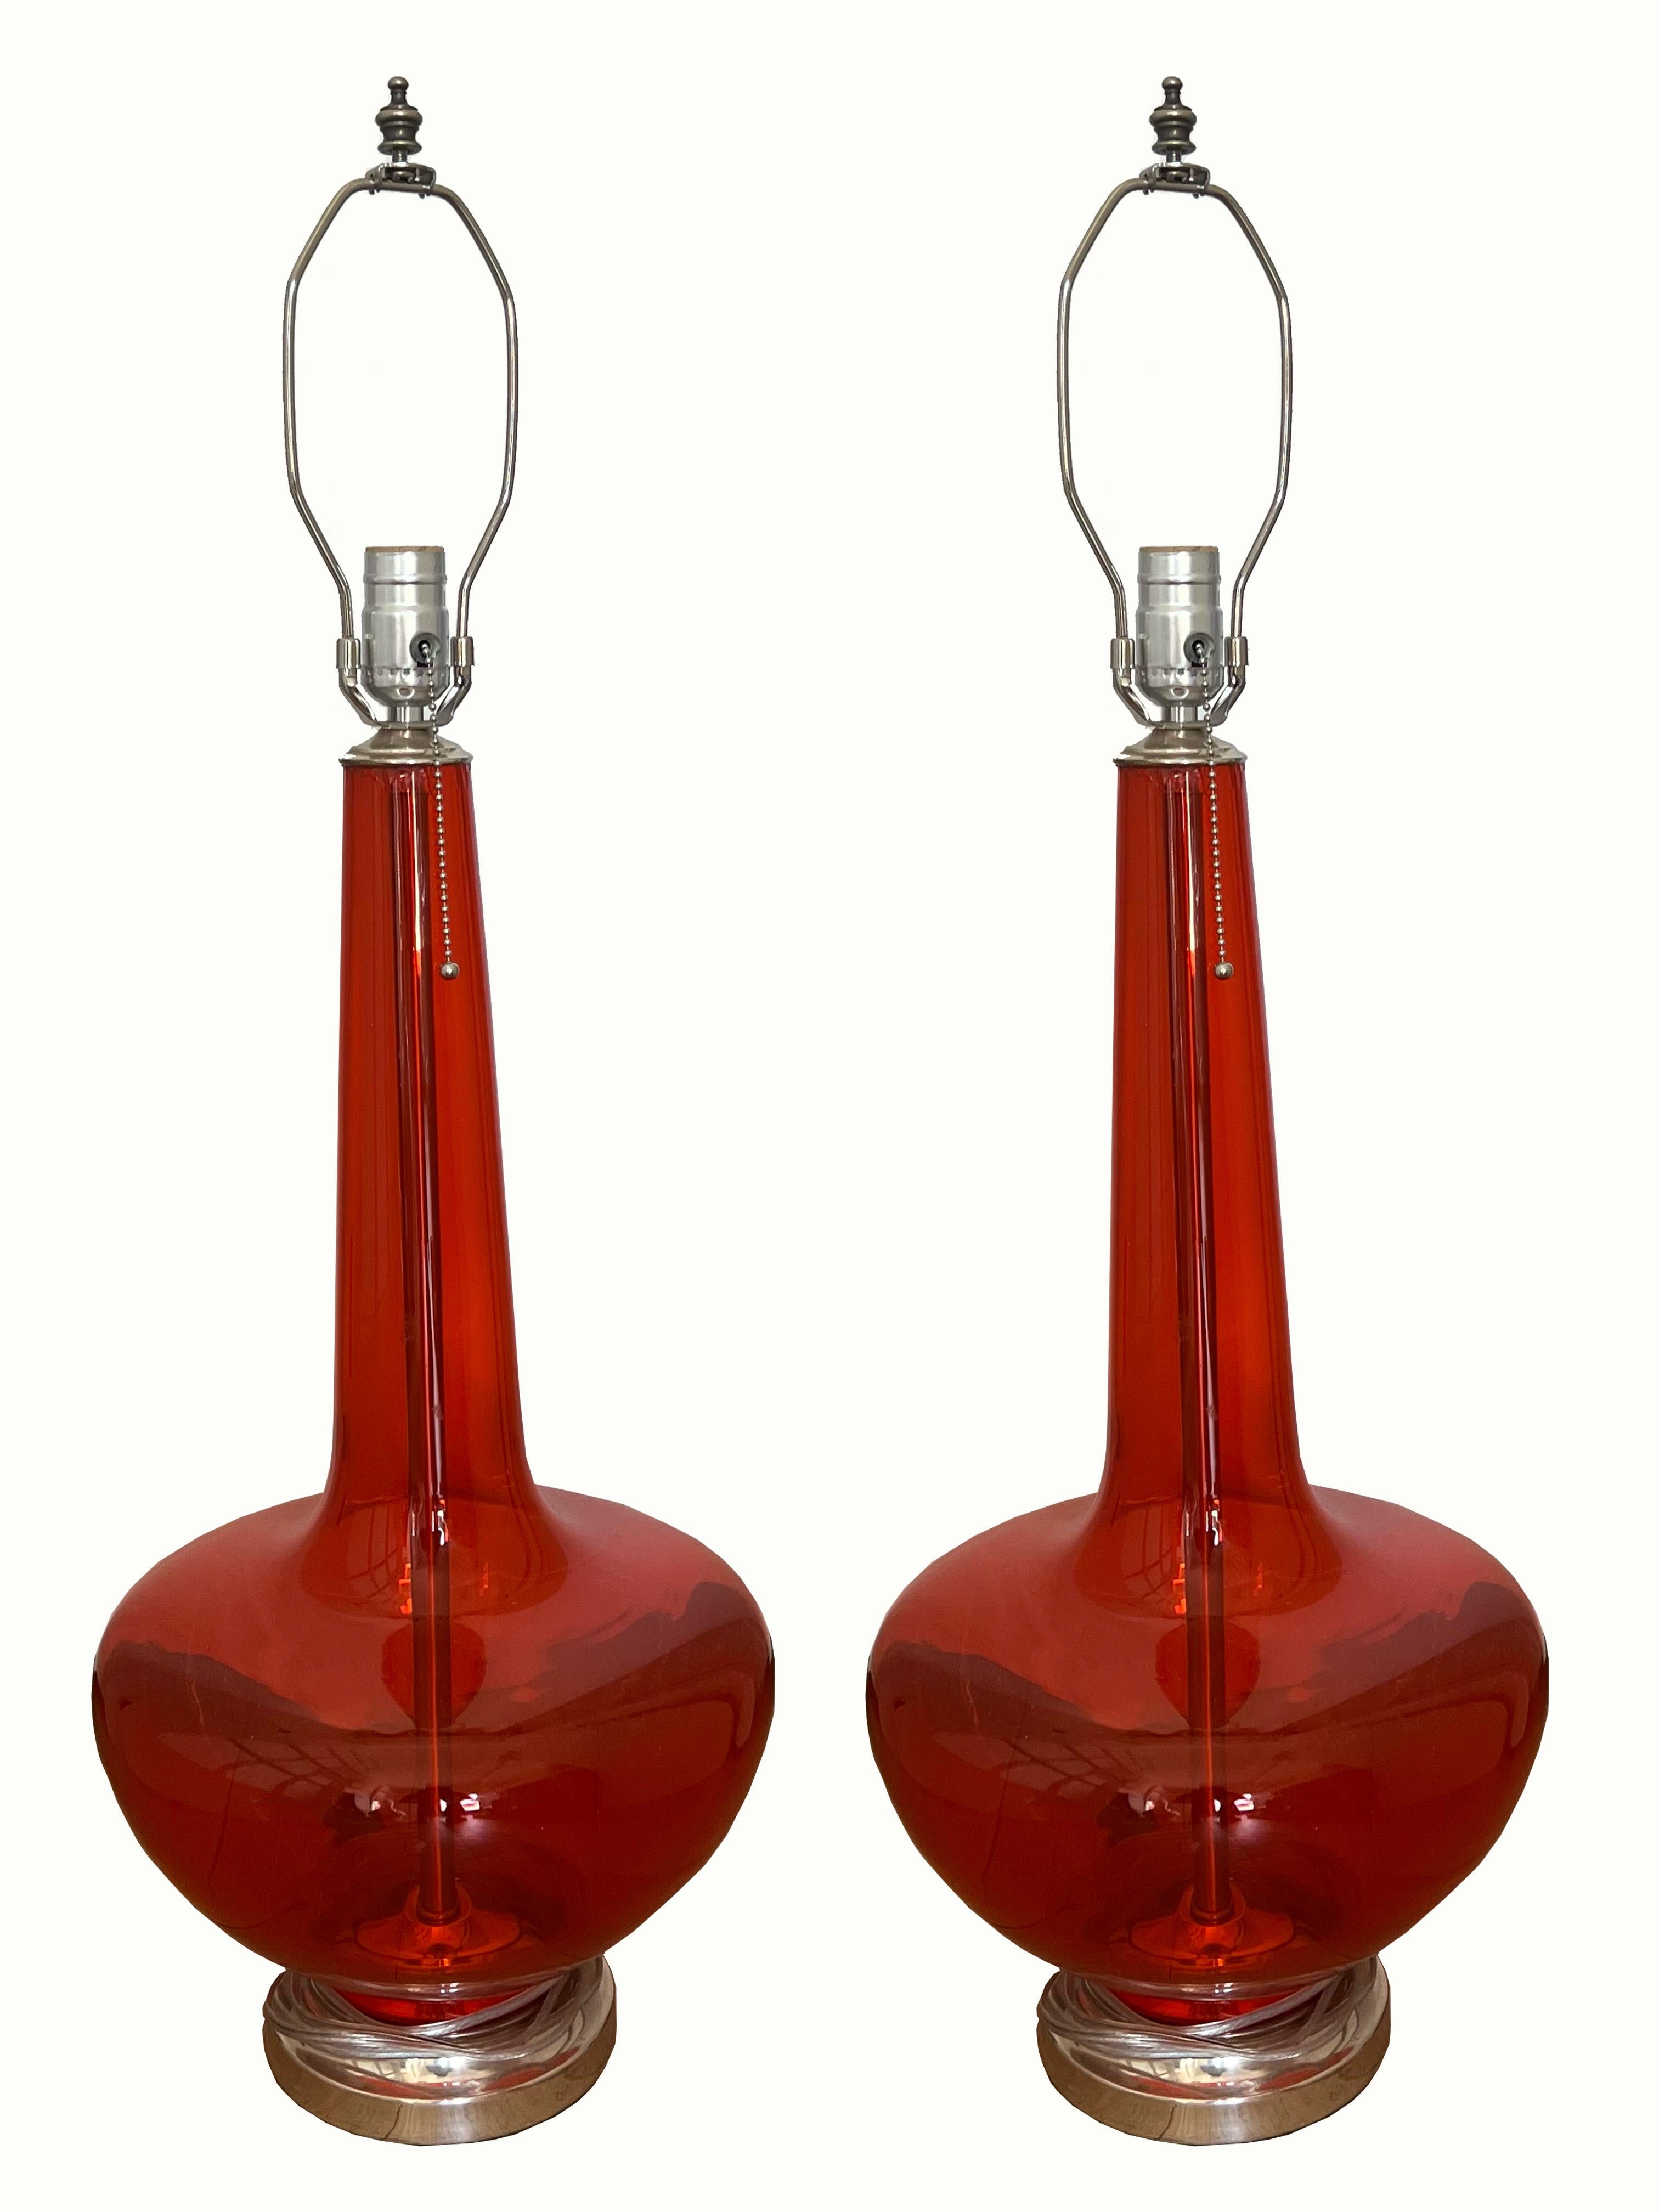 This is a pair of vintage Murano lamps. The glass is in perfect condition and the brass is in excellent condition. They are sold as a pair. The dimensions of the amps are 31